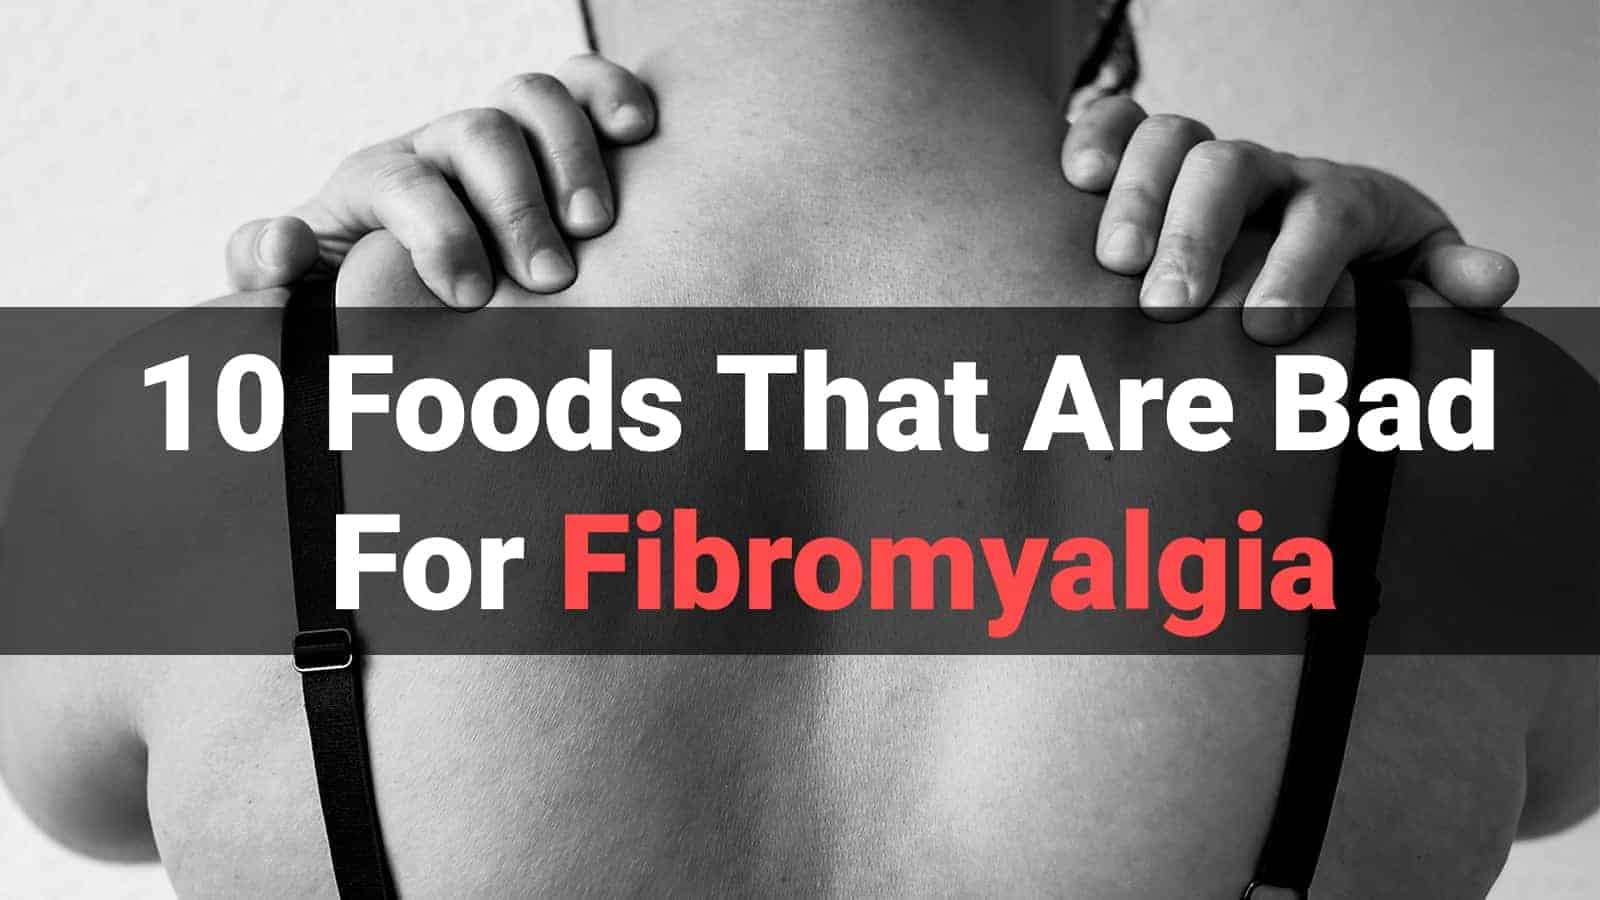 10 Foods That Are Bad For Fibromyalgia